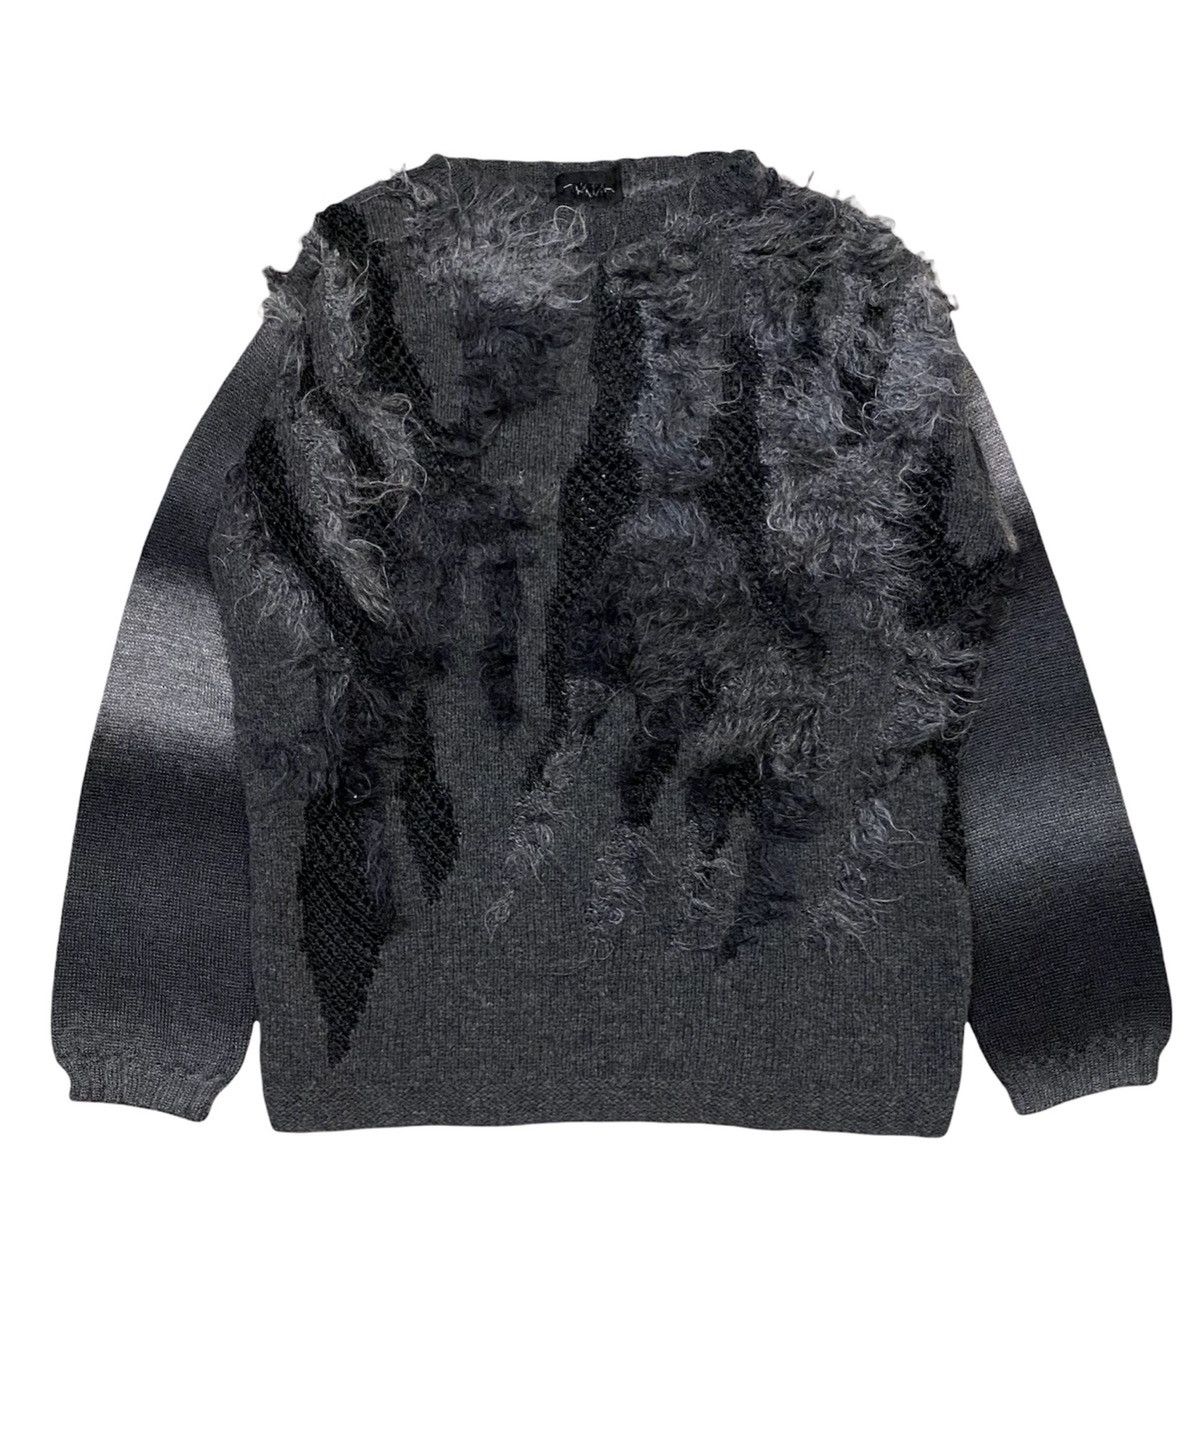 Archival Clothing 90s FICCE HAND Knit mesh mohair destroy | Grailed